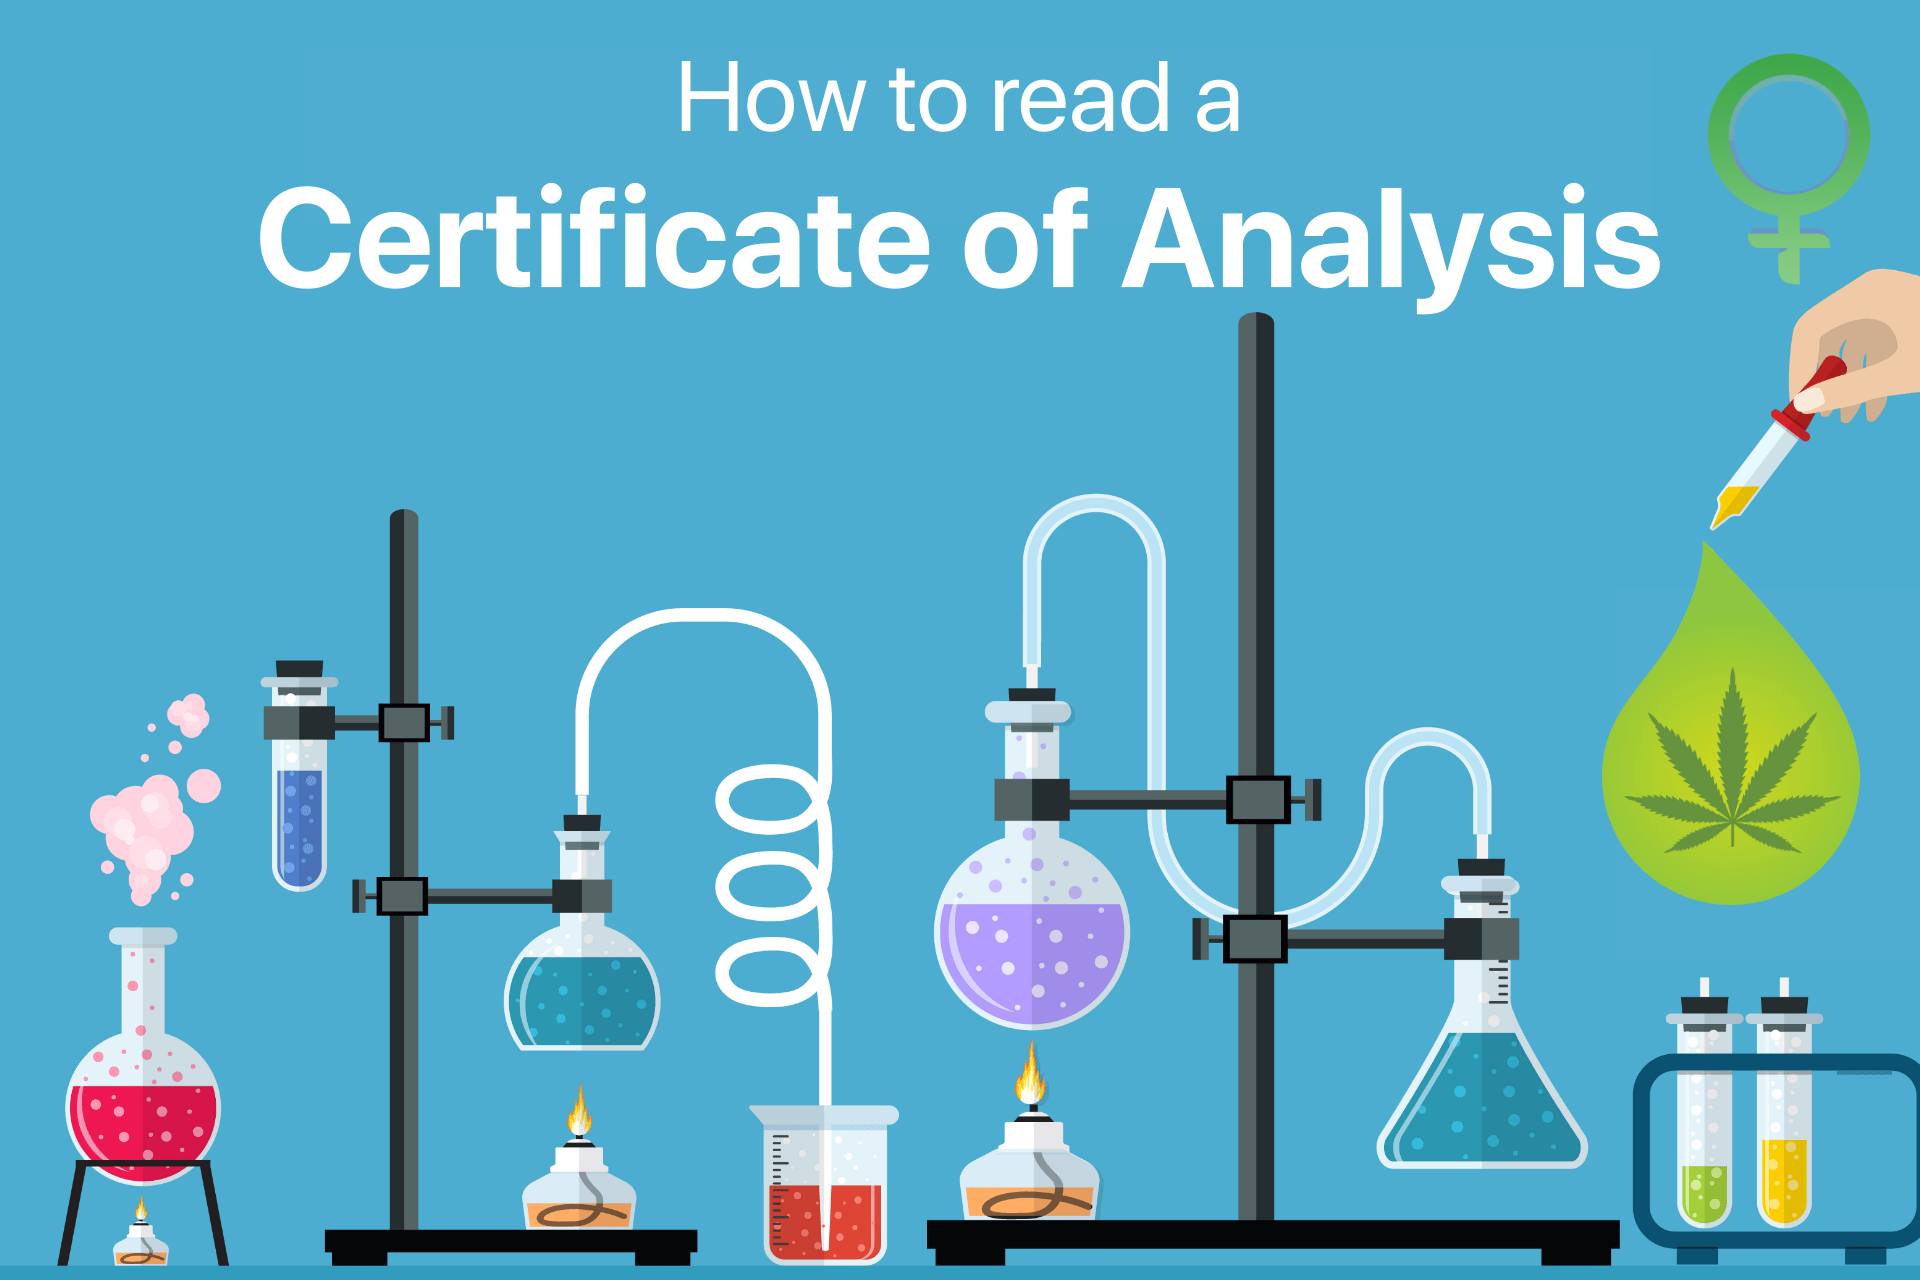 How to read a Certificate of Analysis (COA)